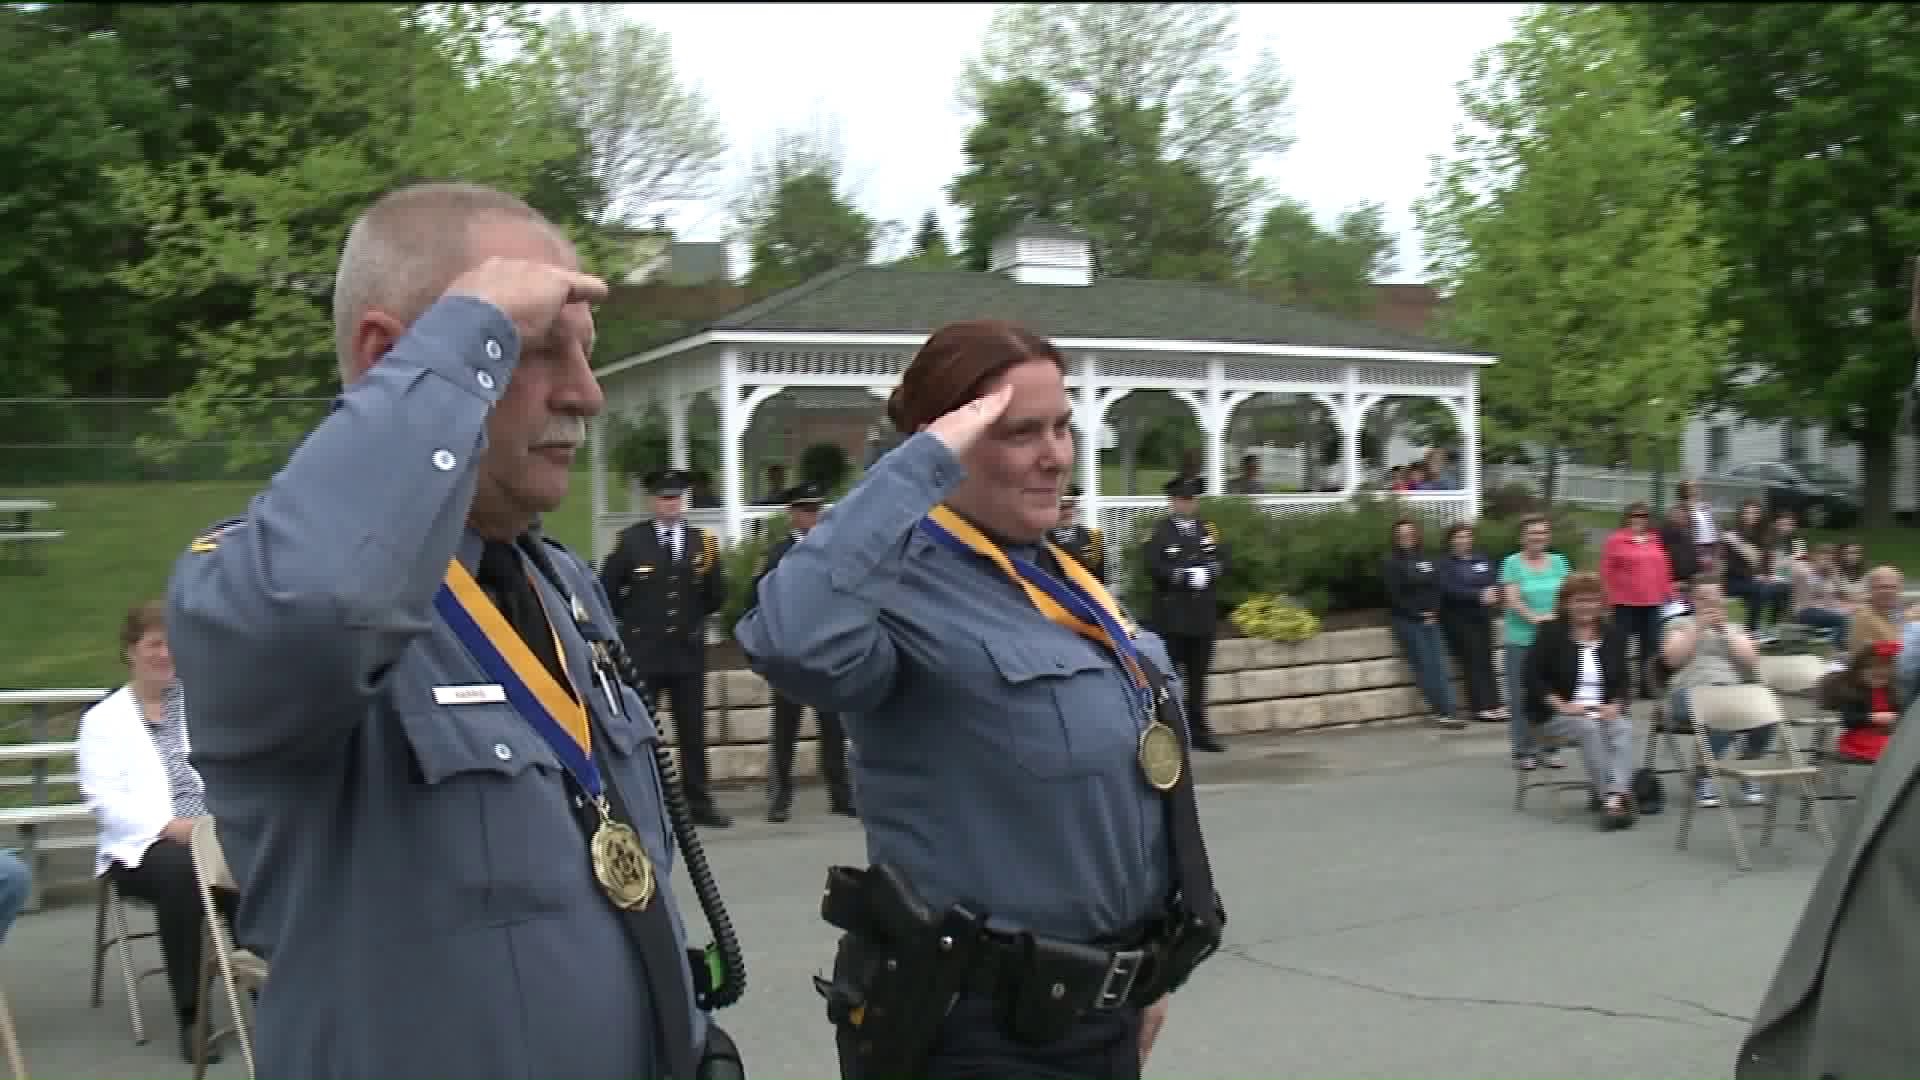 Police Officers Who Ran into Burning Building Honored in Lackawanna County